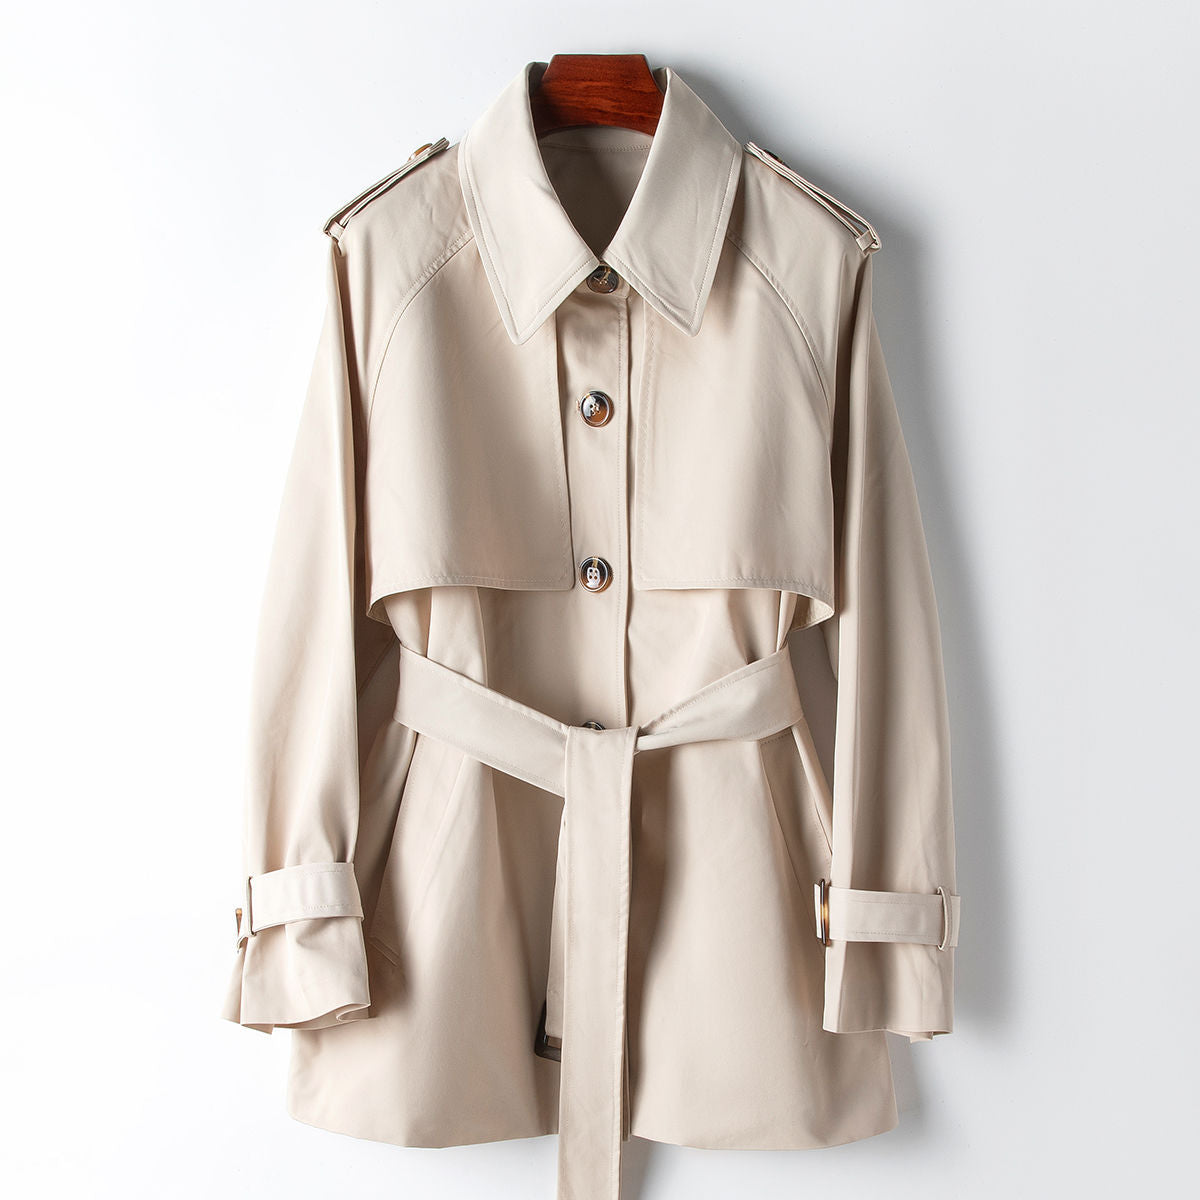 L'AMOURÉLLE BELTED TRENCH COAT BY VITTORIA VELURE™